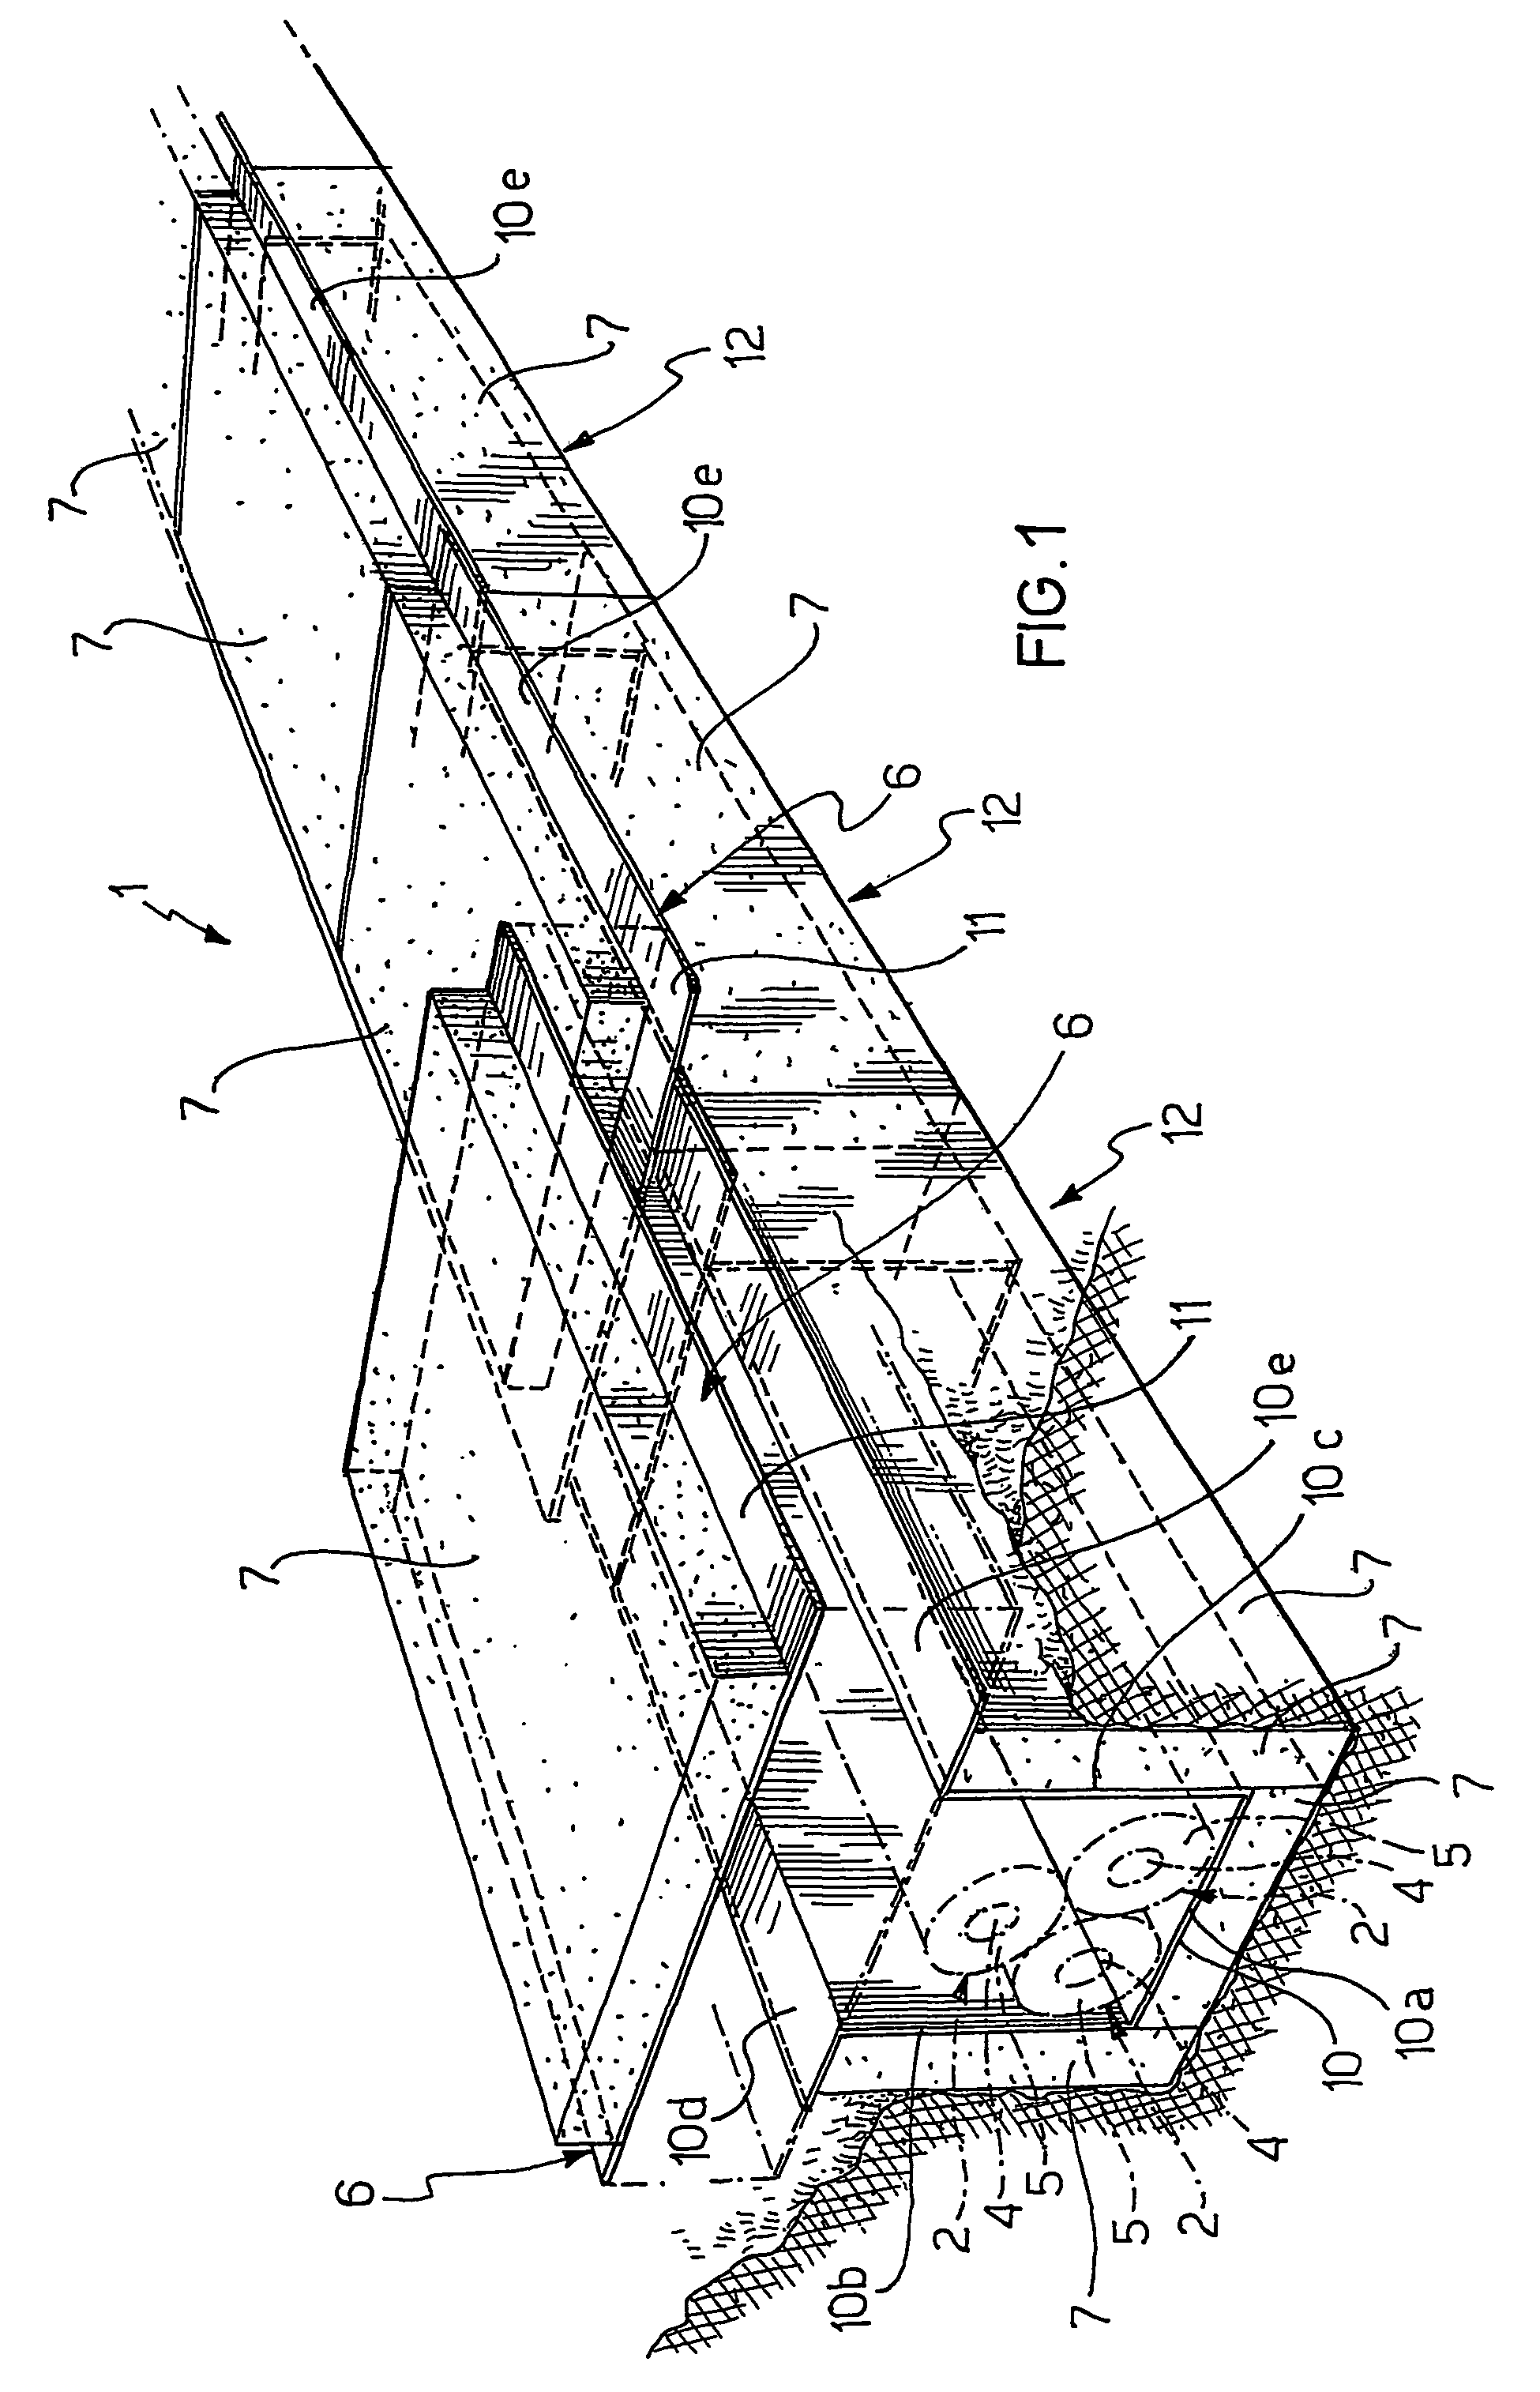 Method for shielding the magnetic field generated by an electrical power transmission line and electrical power transmission line so shielded